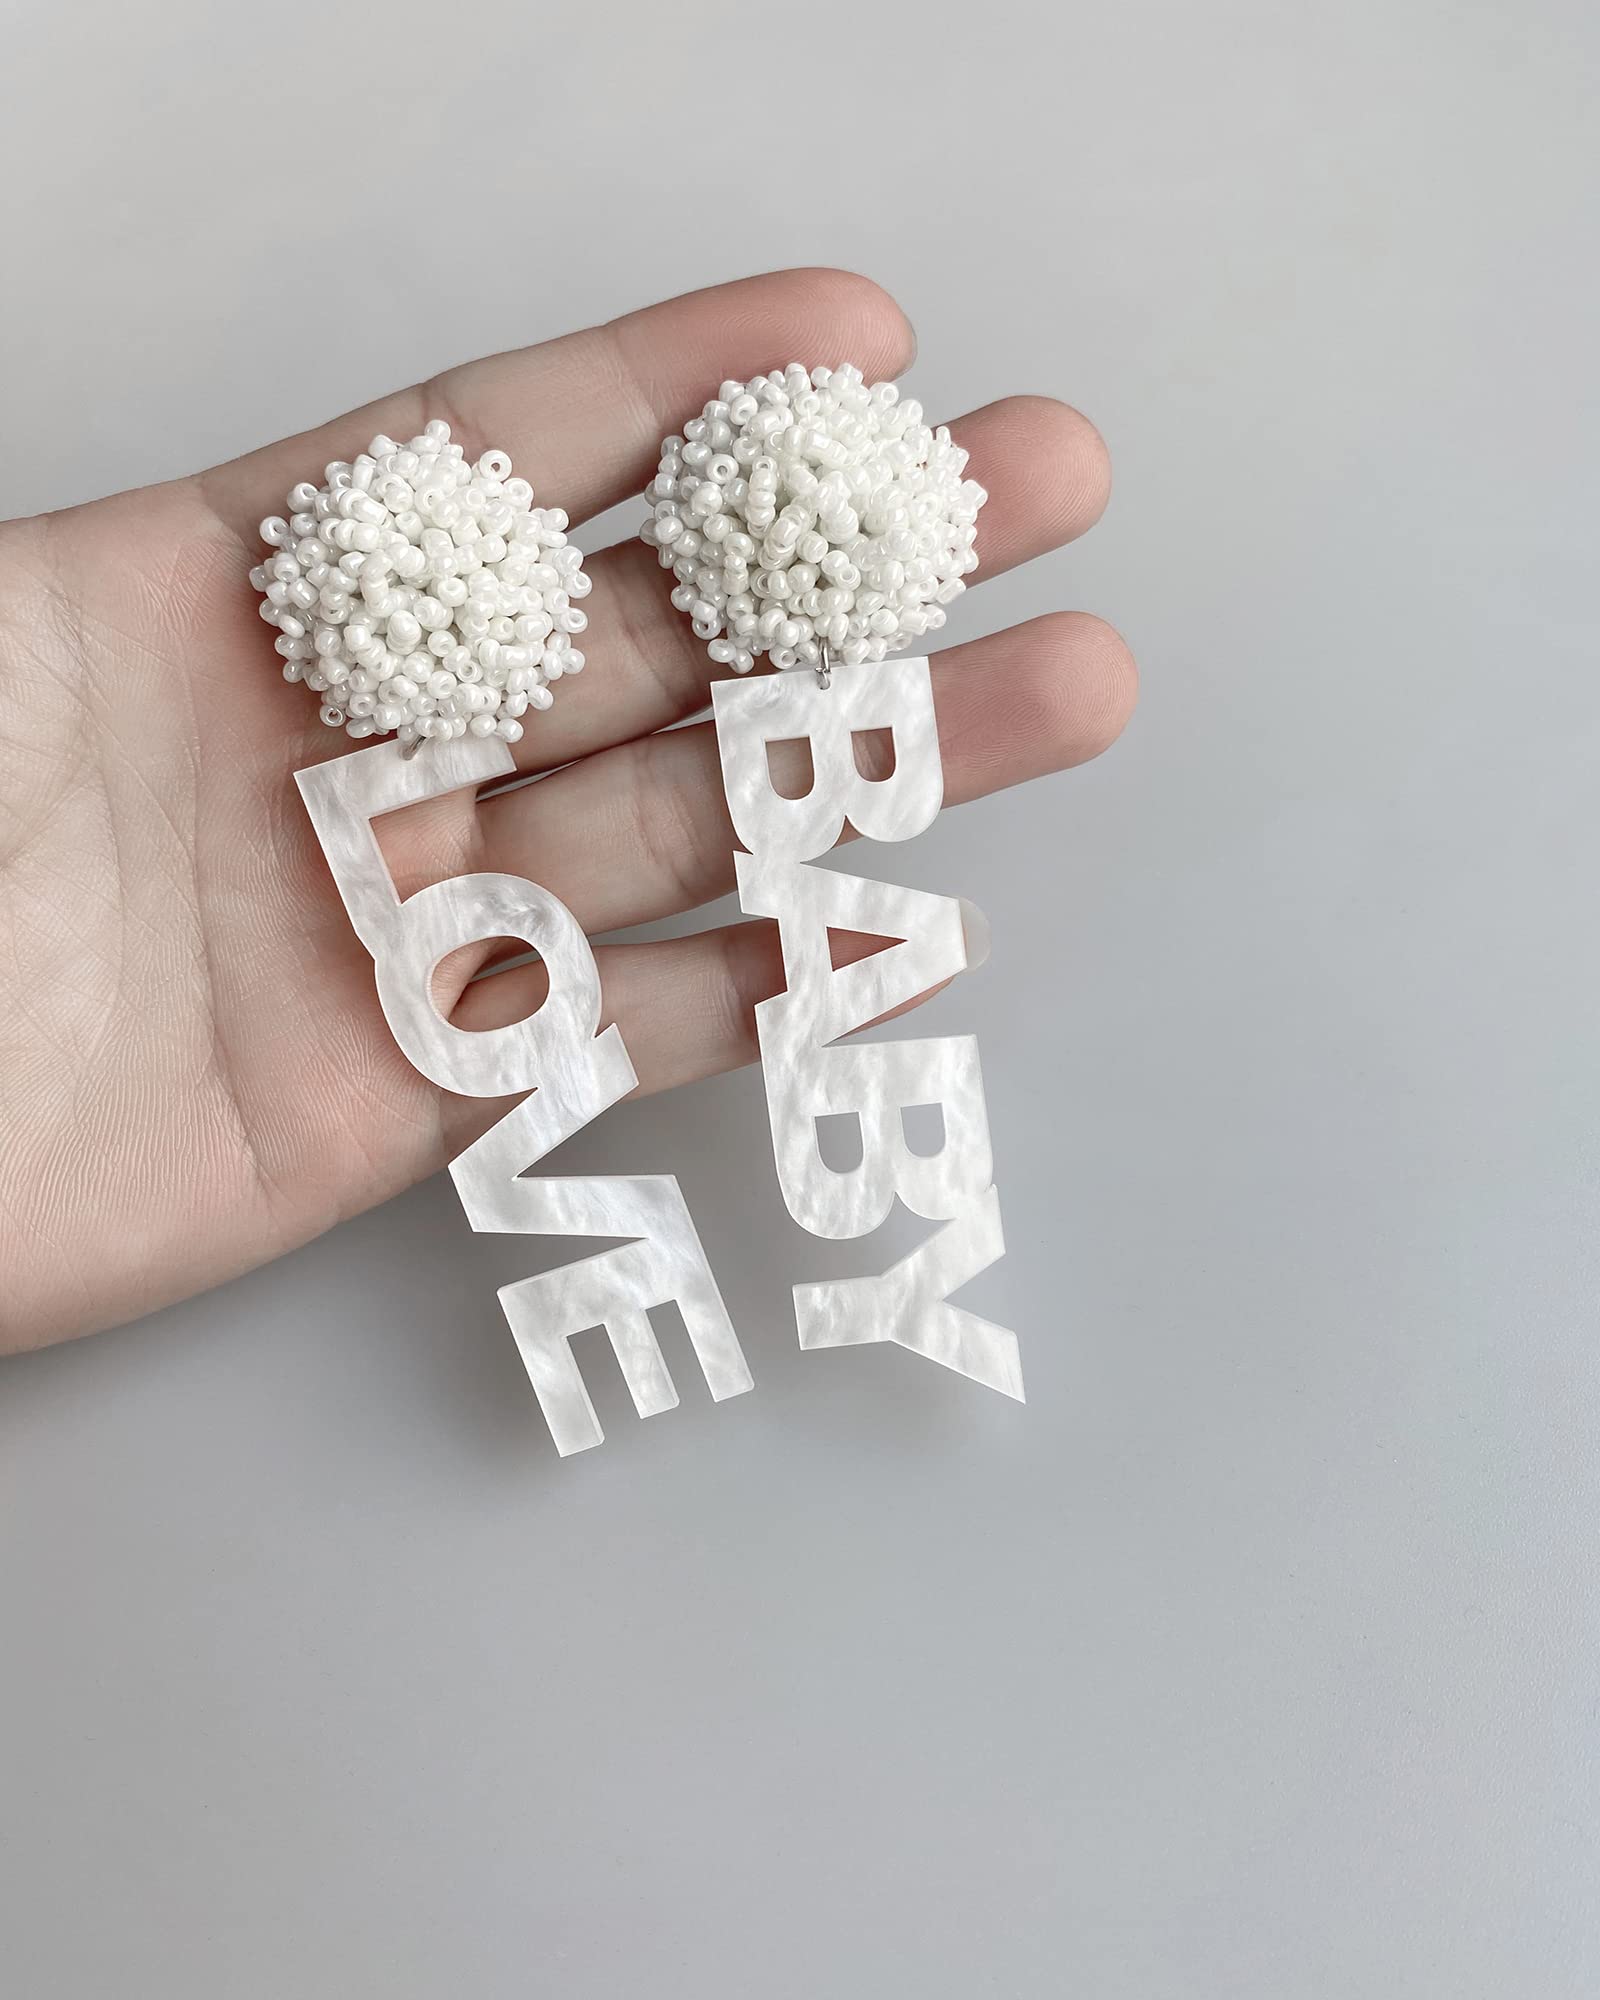 LOVE BABY Sign Earrings for First Birthday, Baby Shower, Pregnancy Announcement, Gender Reveal Party decorations – by JTRF (White)